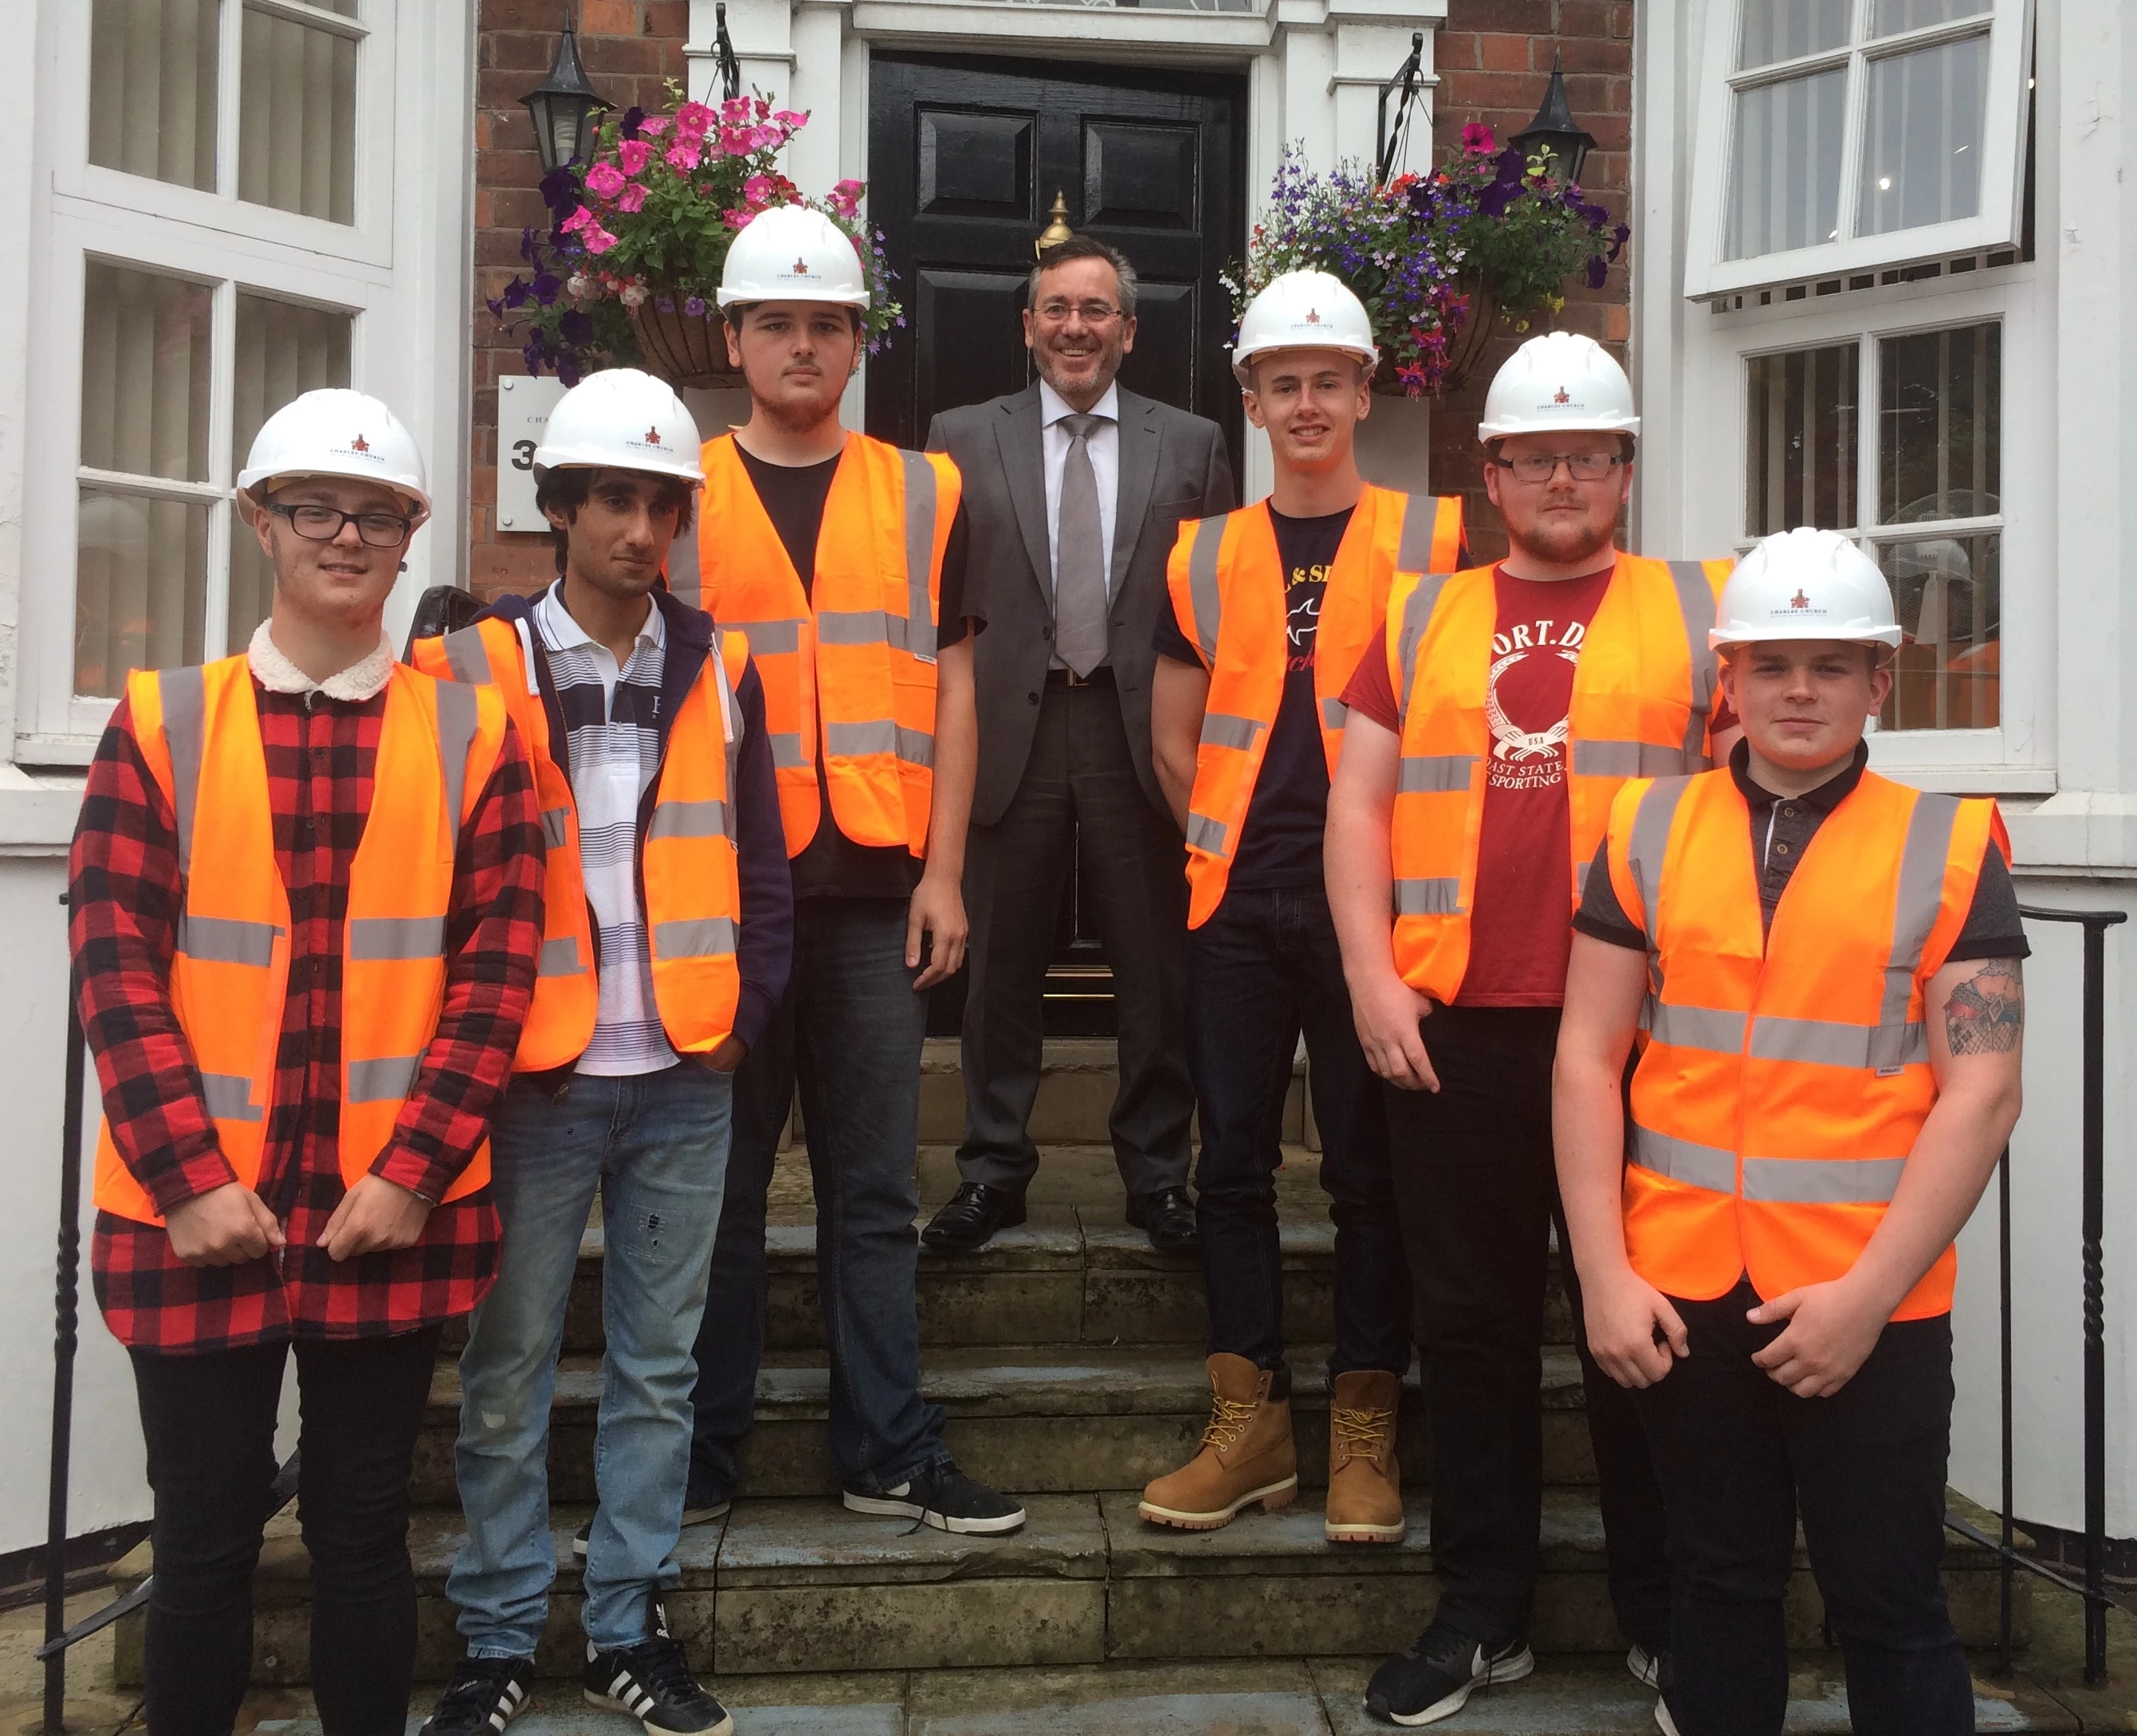 Mark Cook, Regional Managing Director of Persimmon Homes North West, is pictured with the six new brickwork recruits, from left: Jay Smith, Hassan Amin, Nathan White, Lewis Morris, Robbie Doran and Daniel Clare